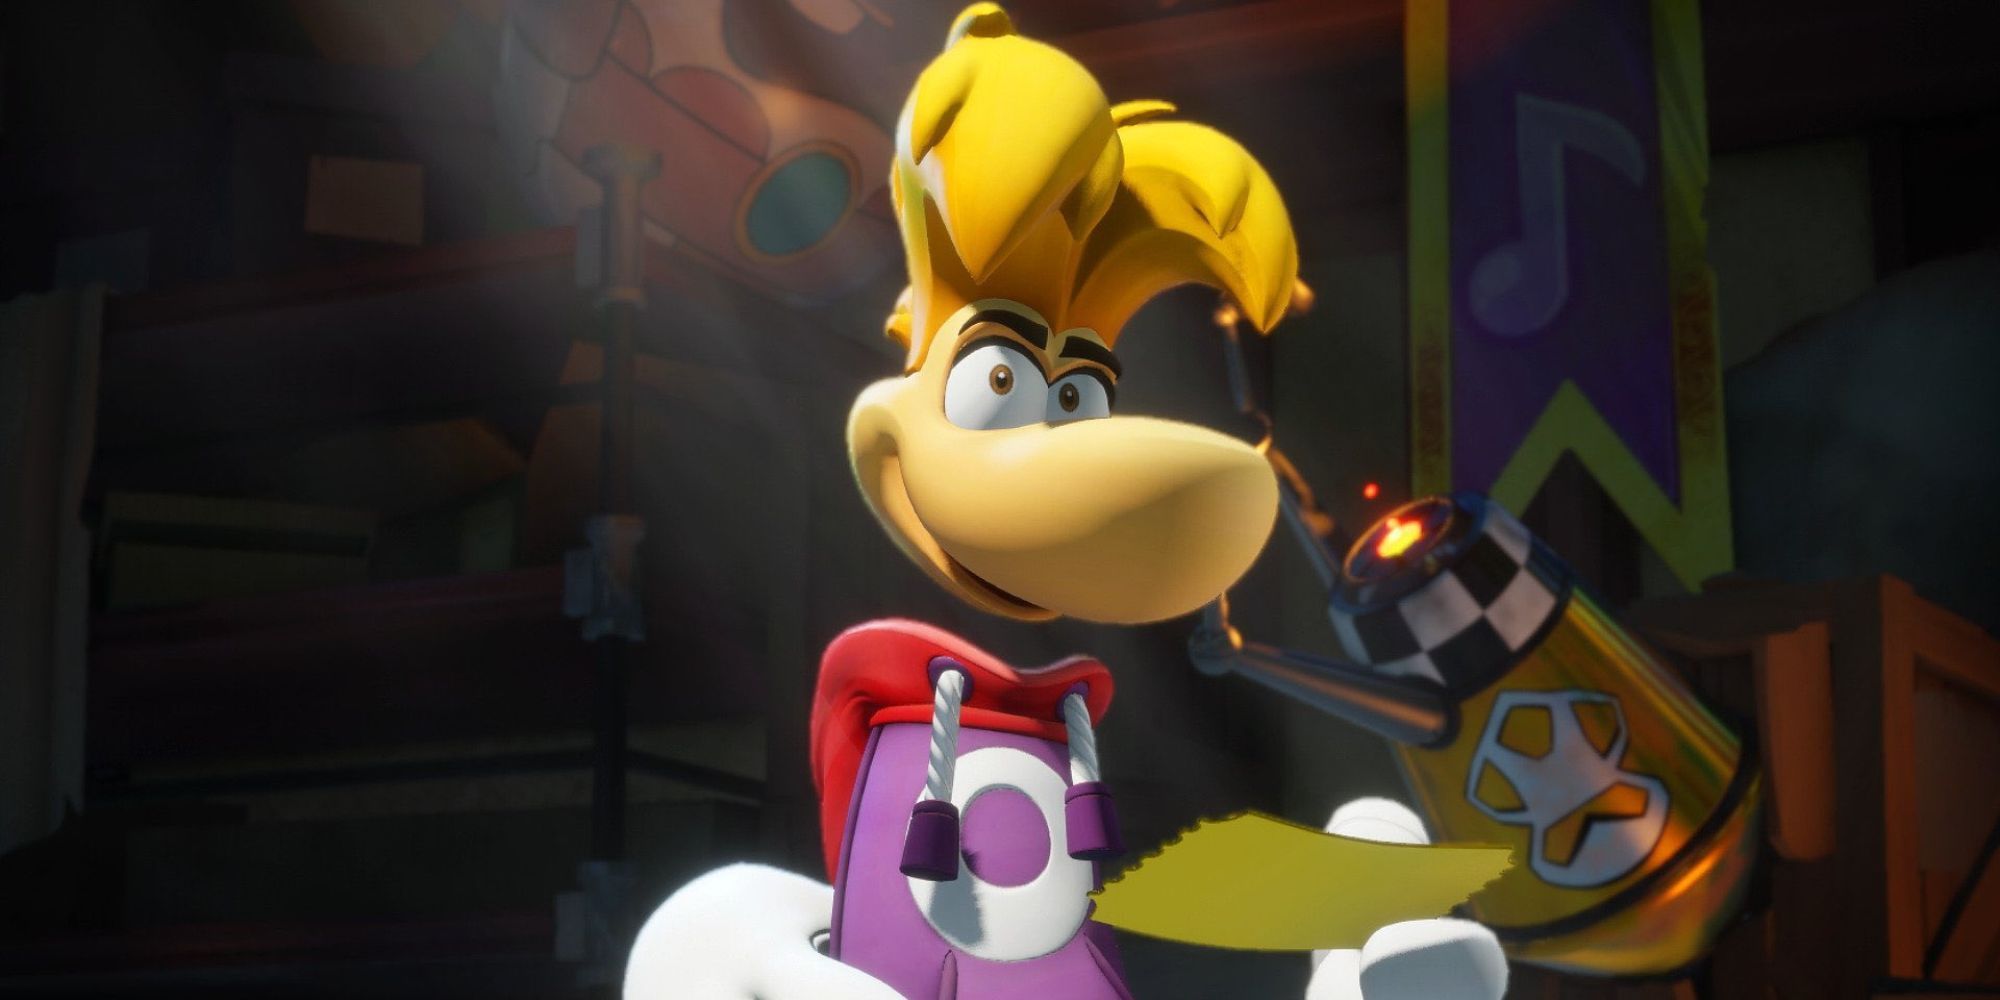 Rayman in the Mario + Rabbids: Sparks of Hope DLC.